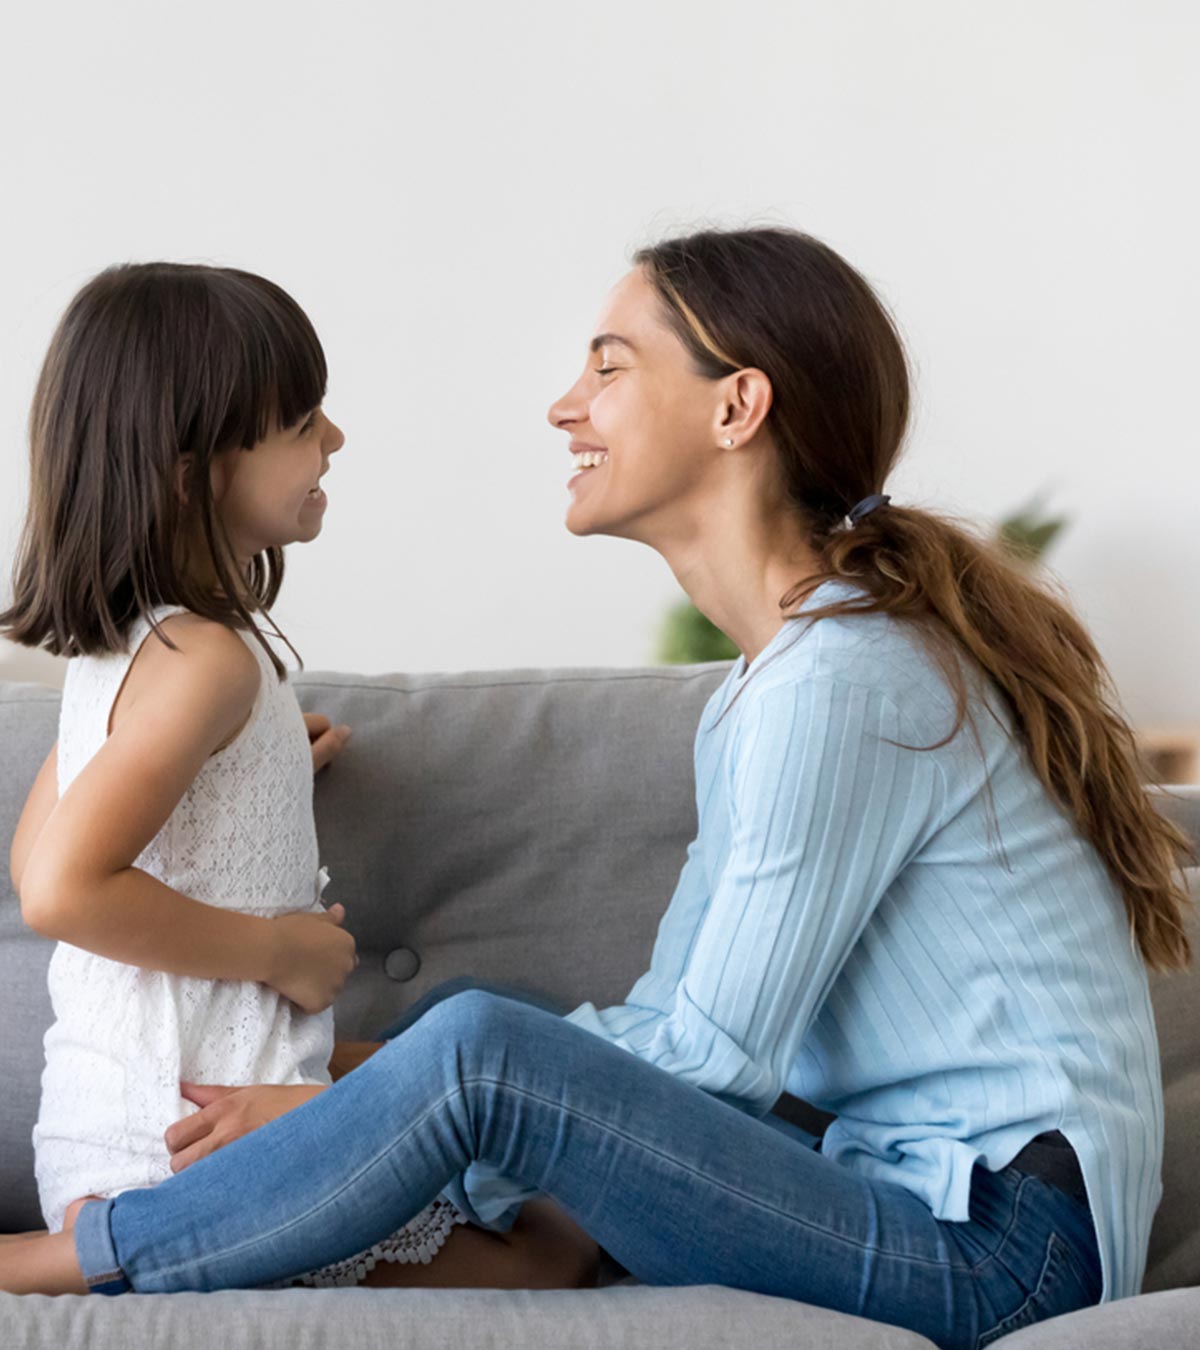 5 Things Every Mom Needs To Hear From Their Kids